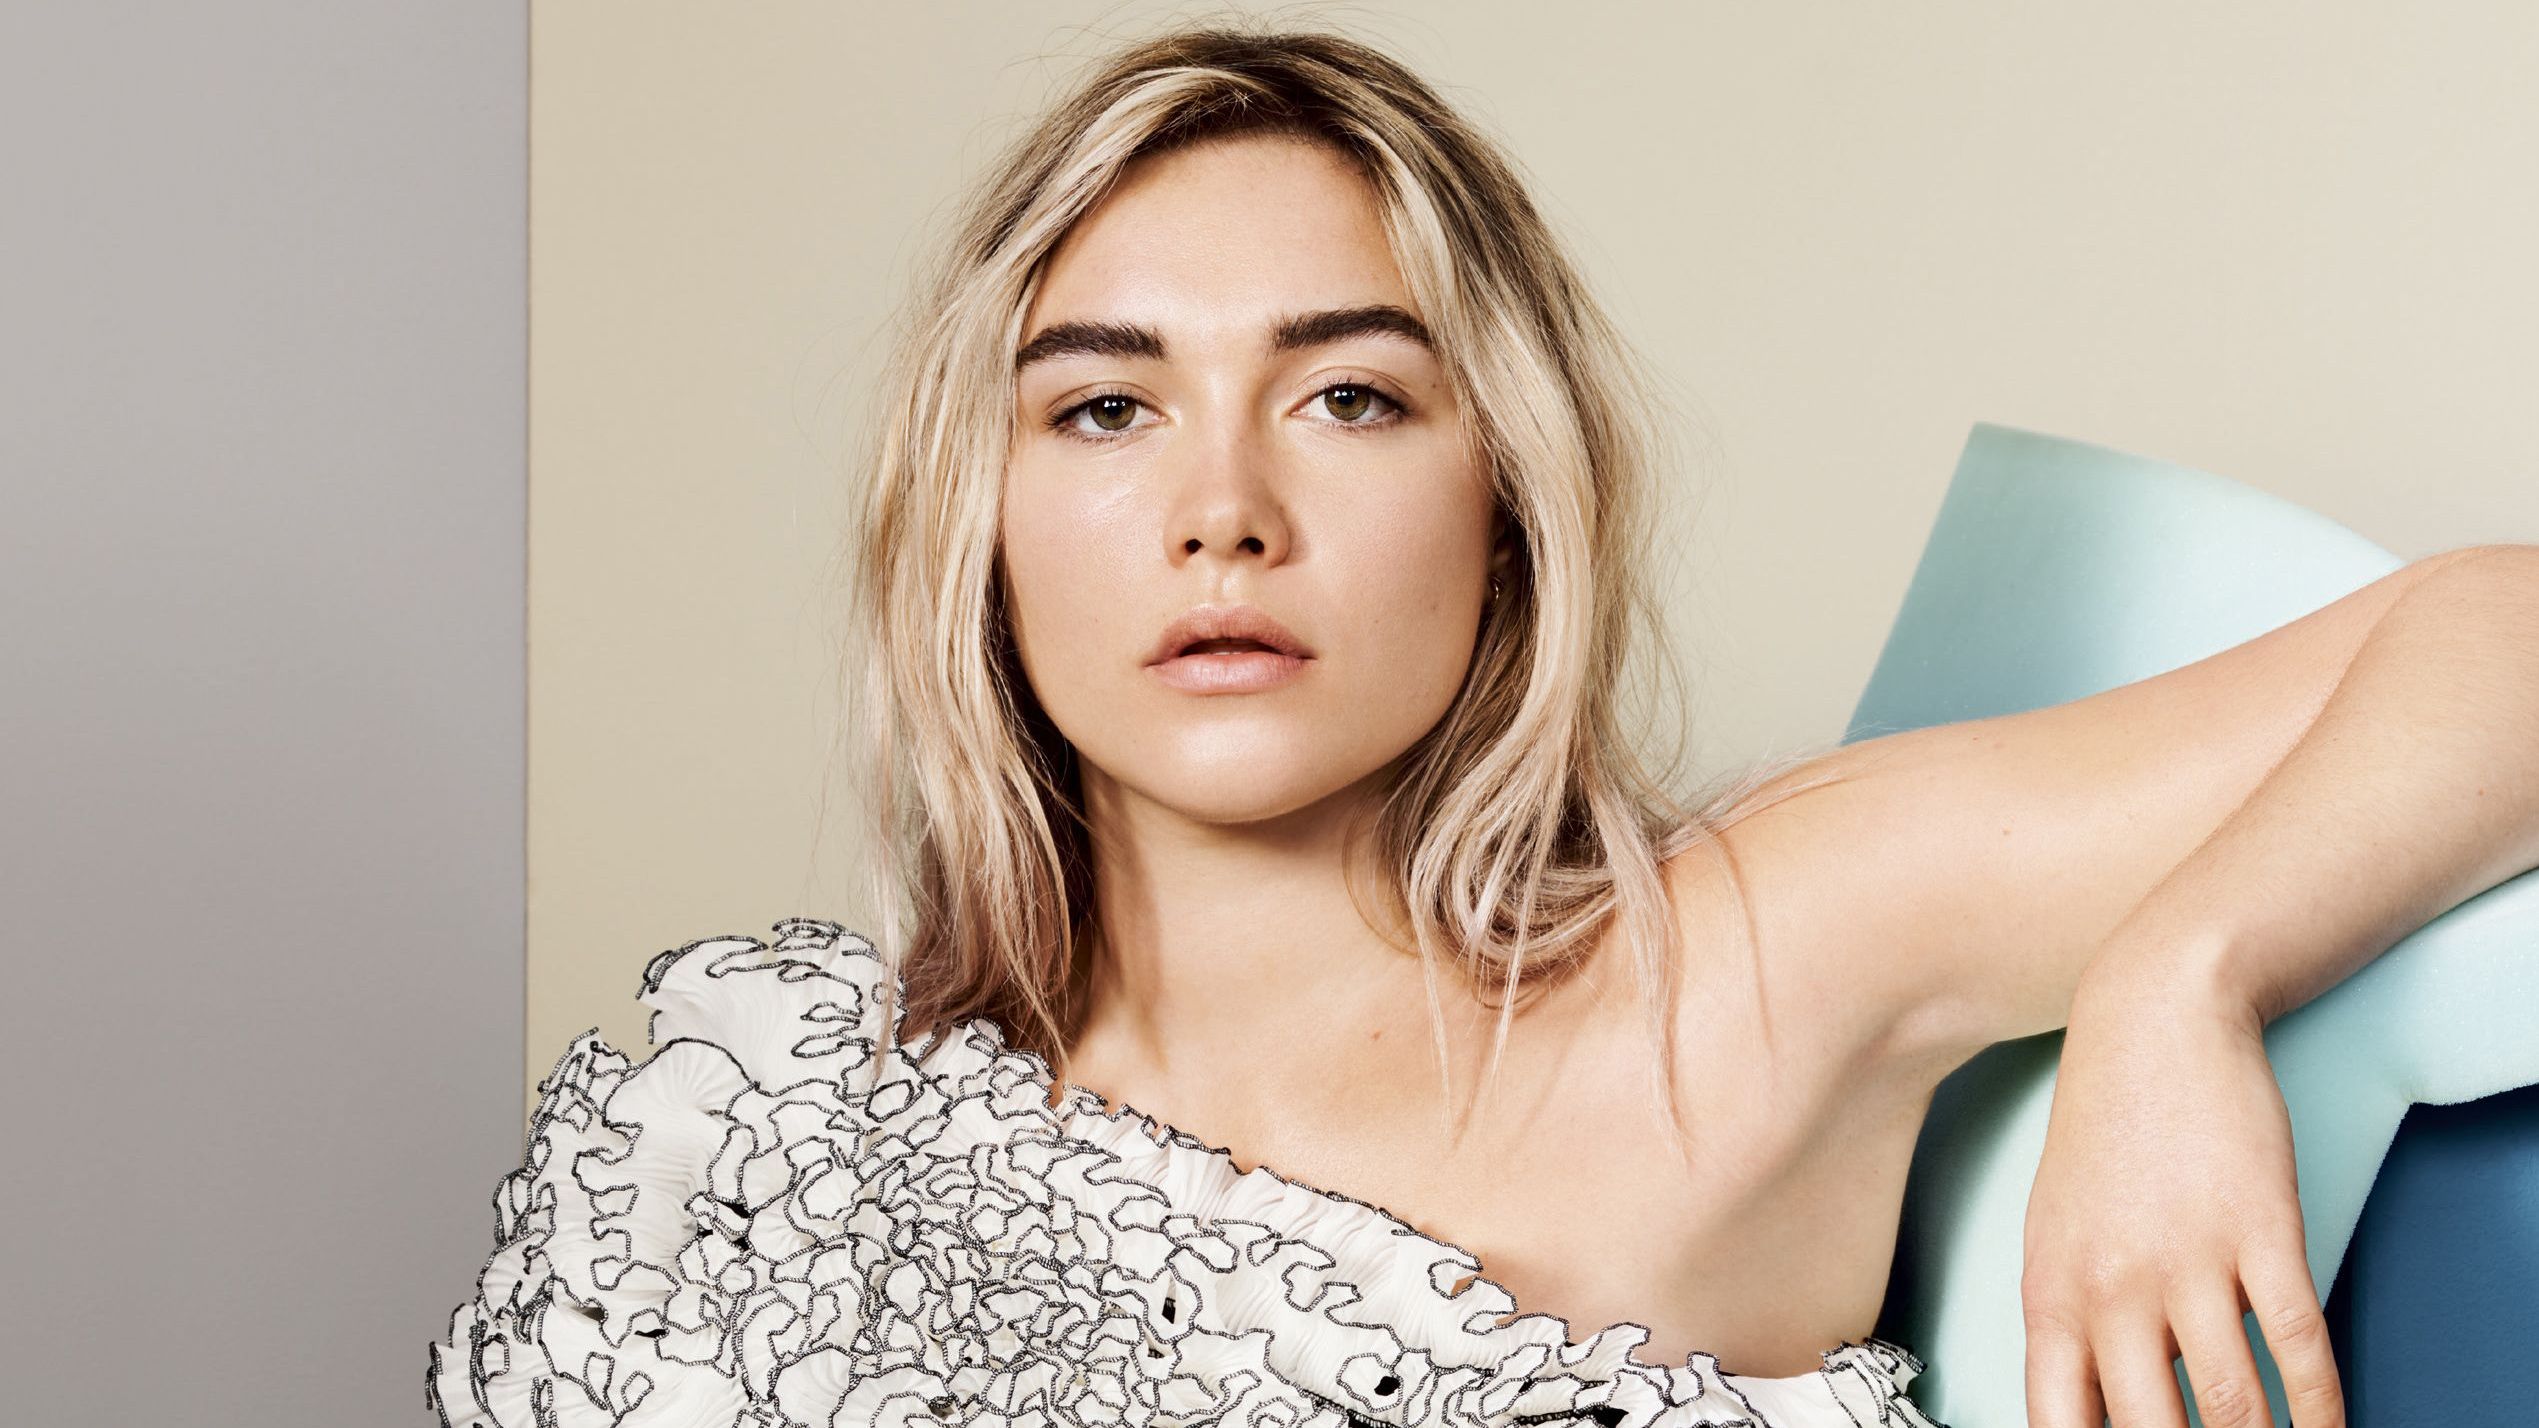 Mobile wallpaper: Blonde, English, Face, Celebrity, Brown Eyes, Actress, Florence Pugh, 982840 download the picture for free